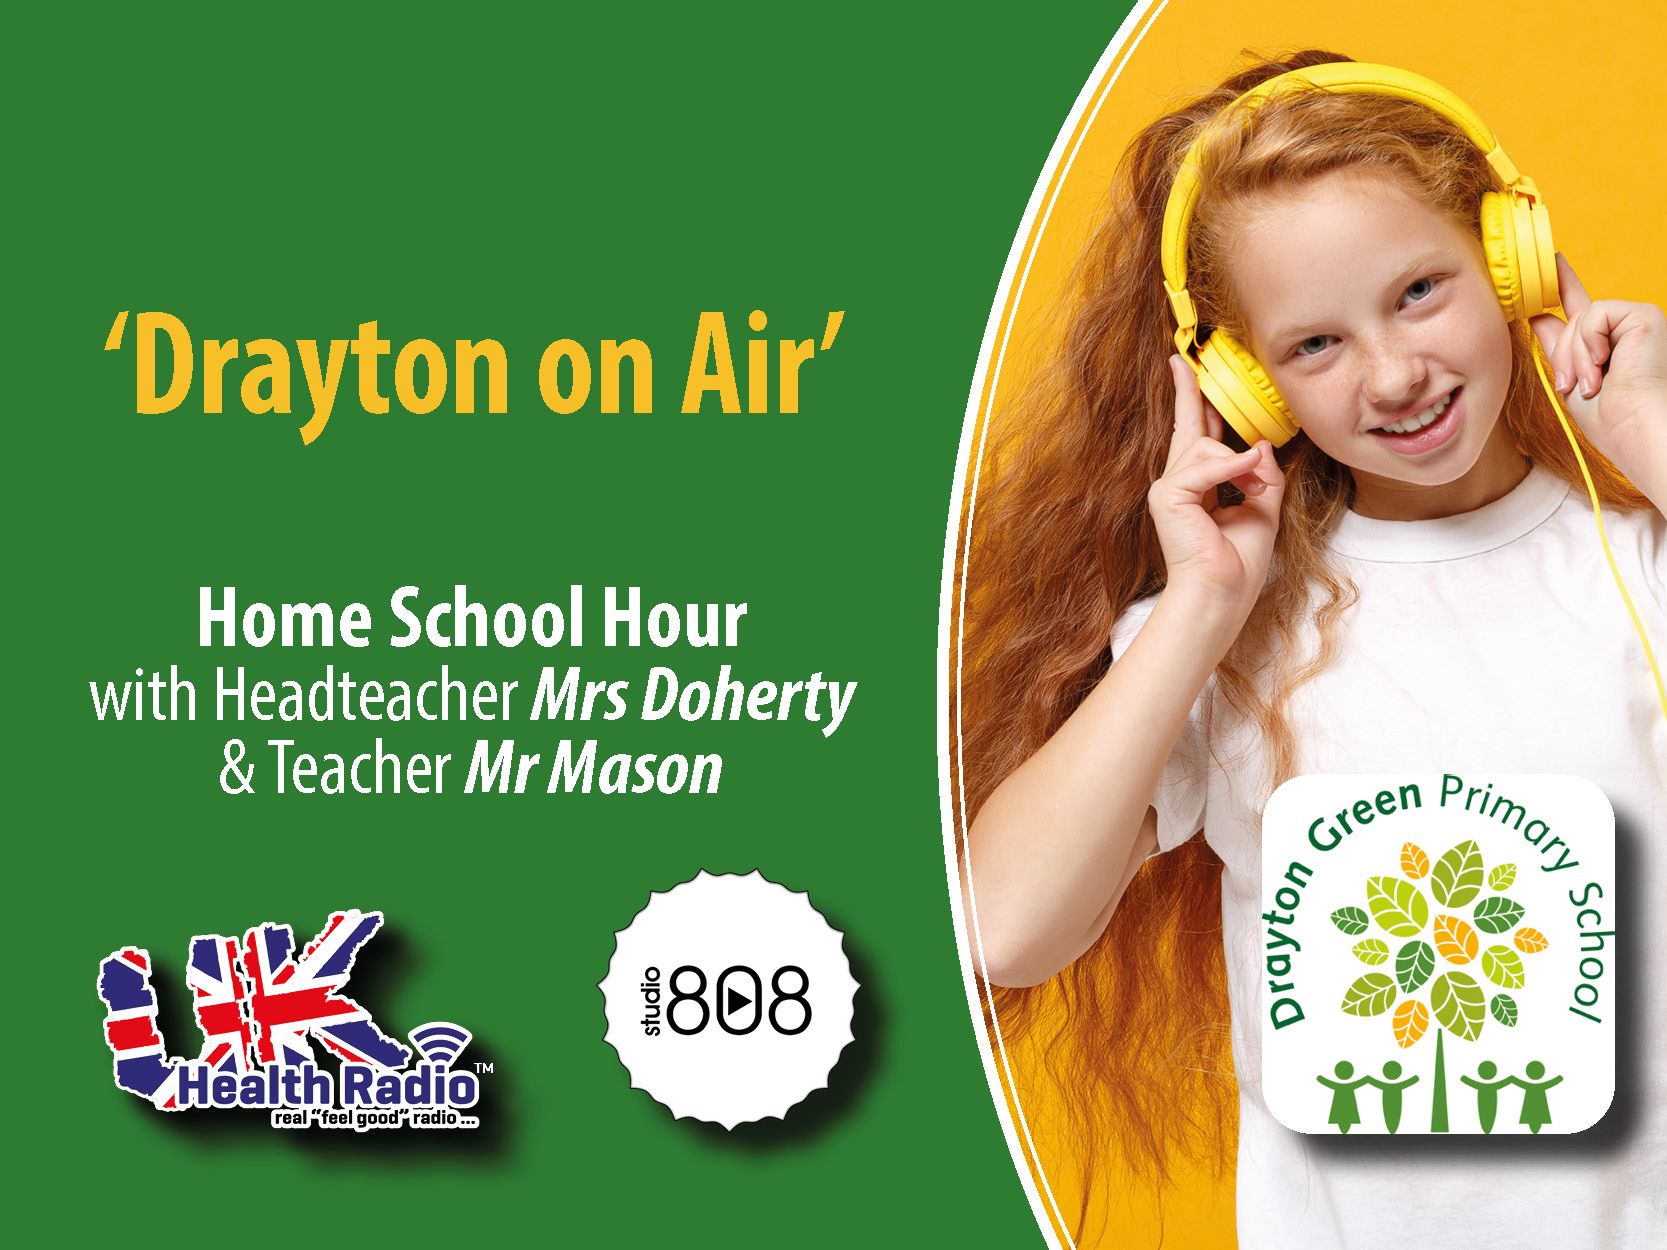 UK Health Radio launches 'Drayton on Air' - Home learning with a local primary school to support children and parents during STAY AT HOME.